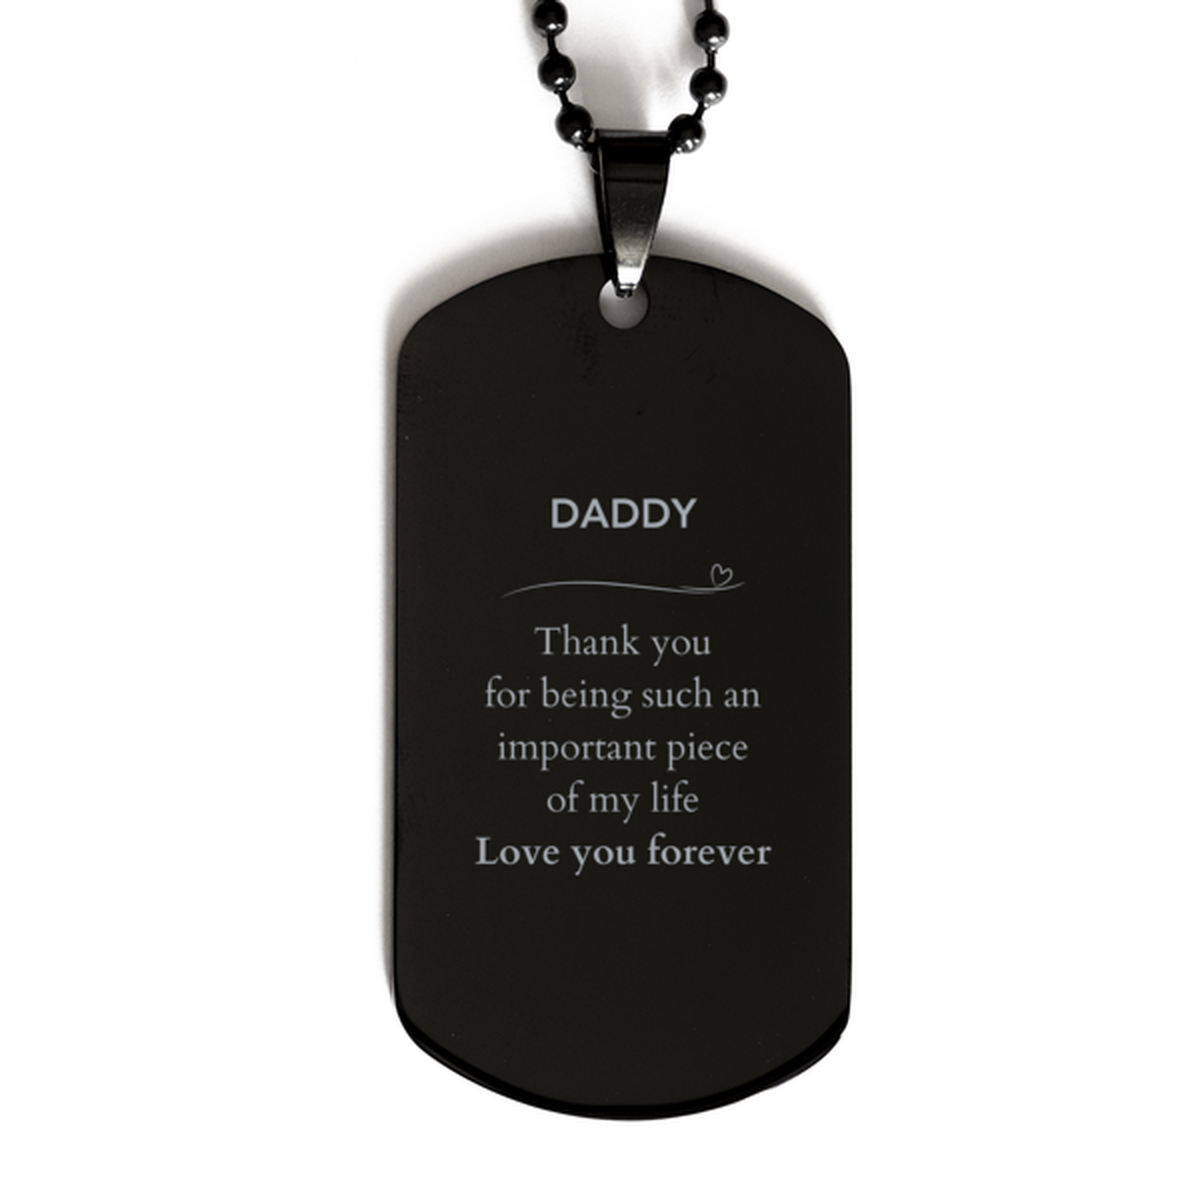 Appropriate Daddy Black Dog Tag Epic Birthday Gifts for Daddy Thank you for being such an important piece of my life Daddy Christmas Mothers Fathers Day